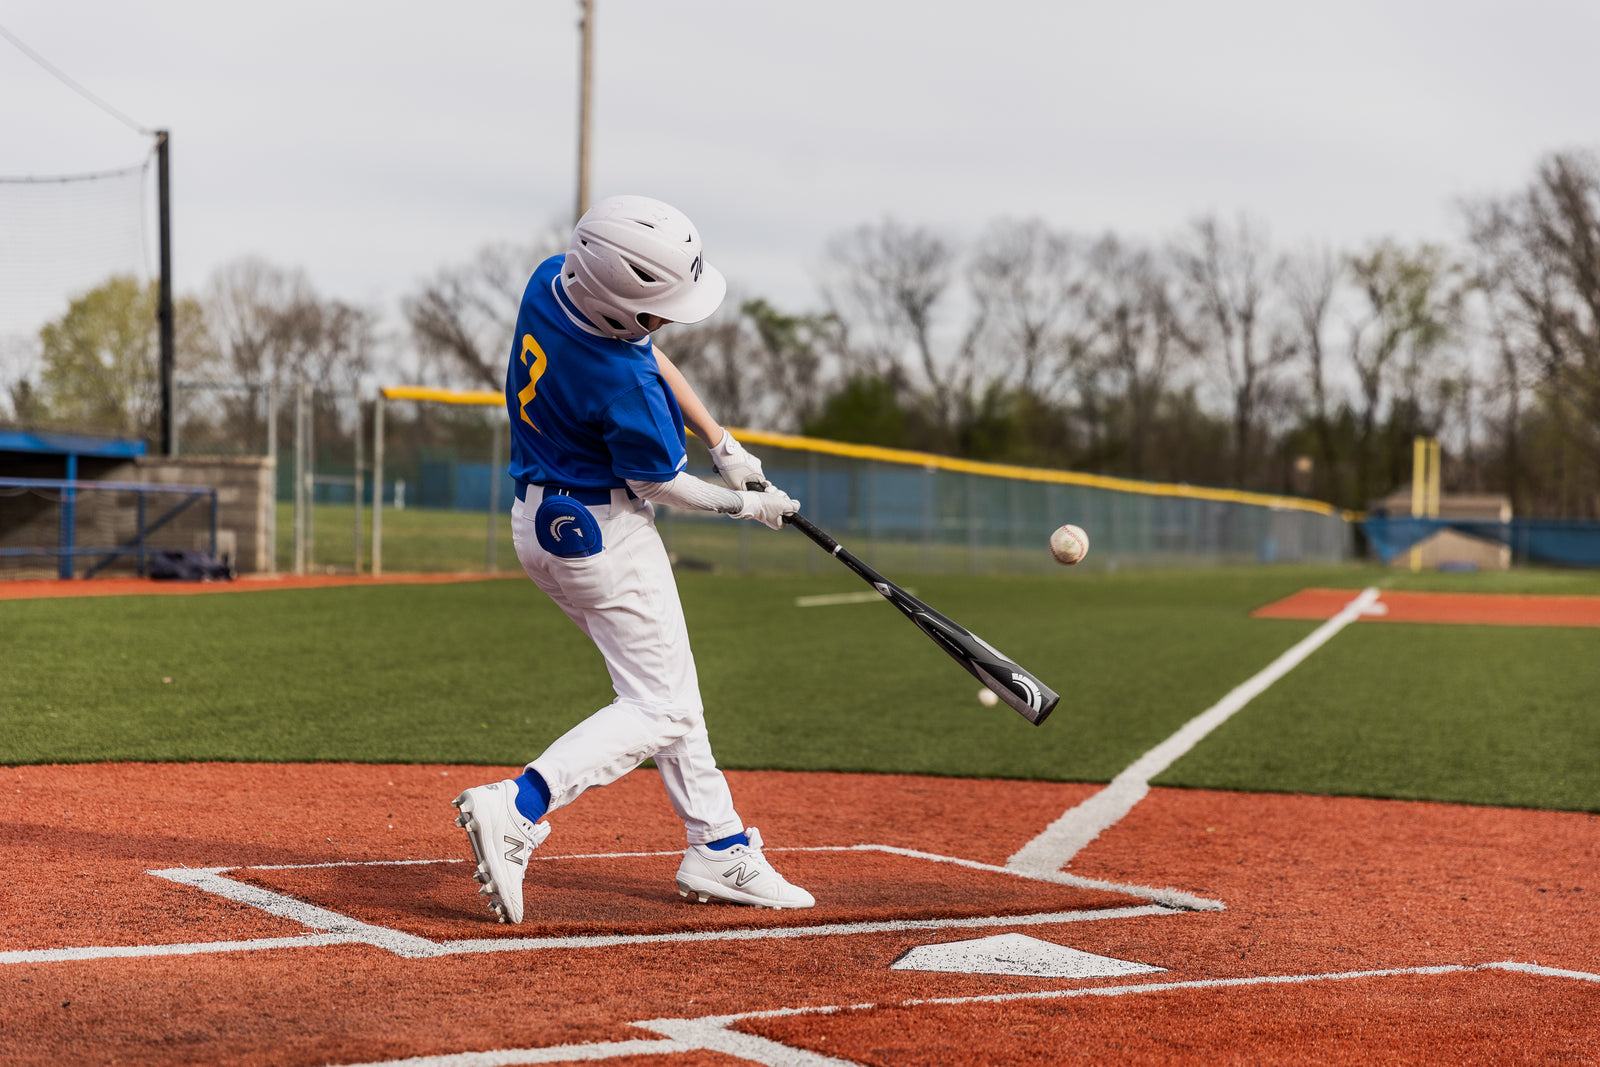 The Top Hitting Drills for Baseball Players